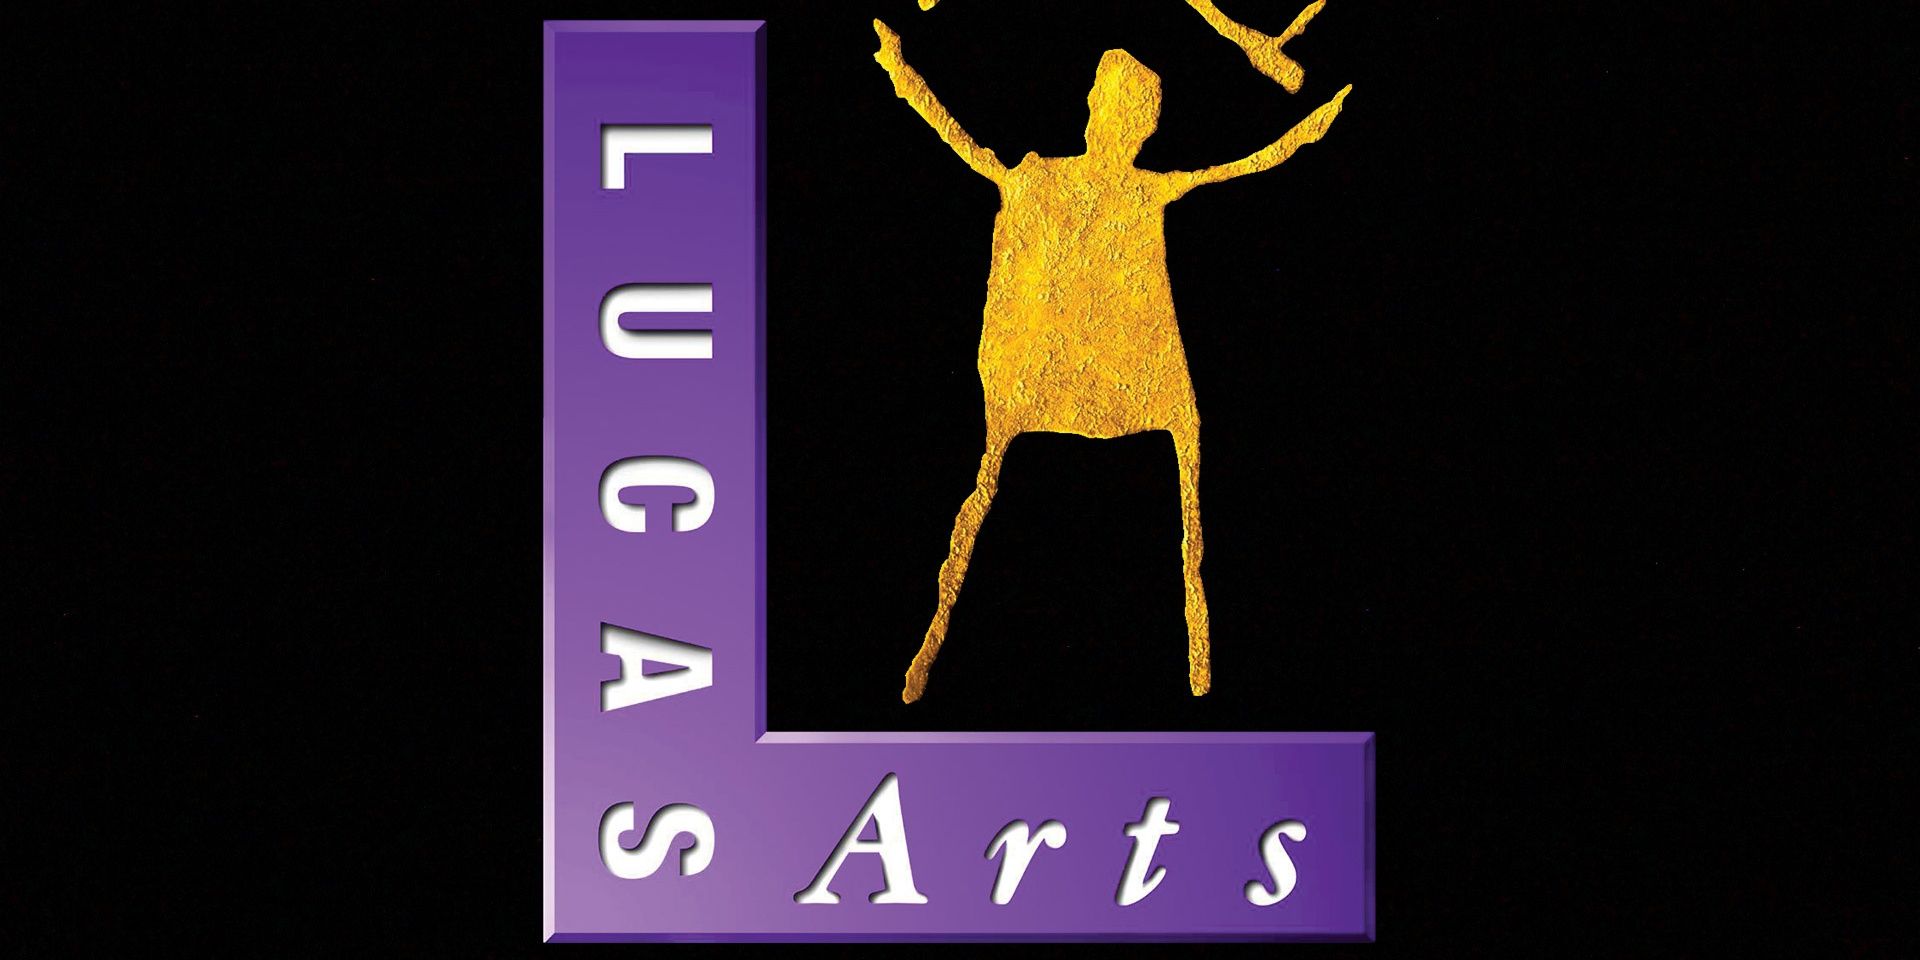 Image of the LucasArts logo.